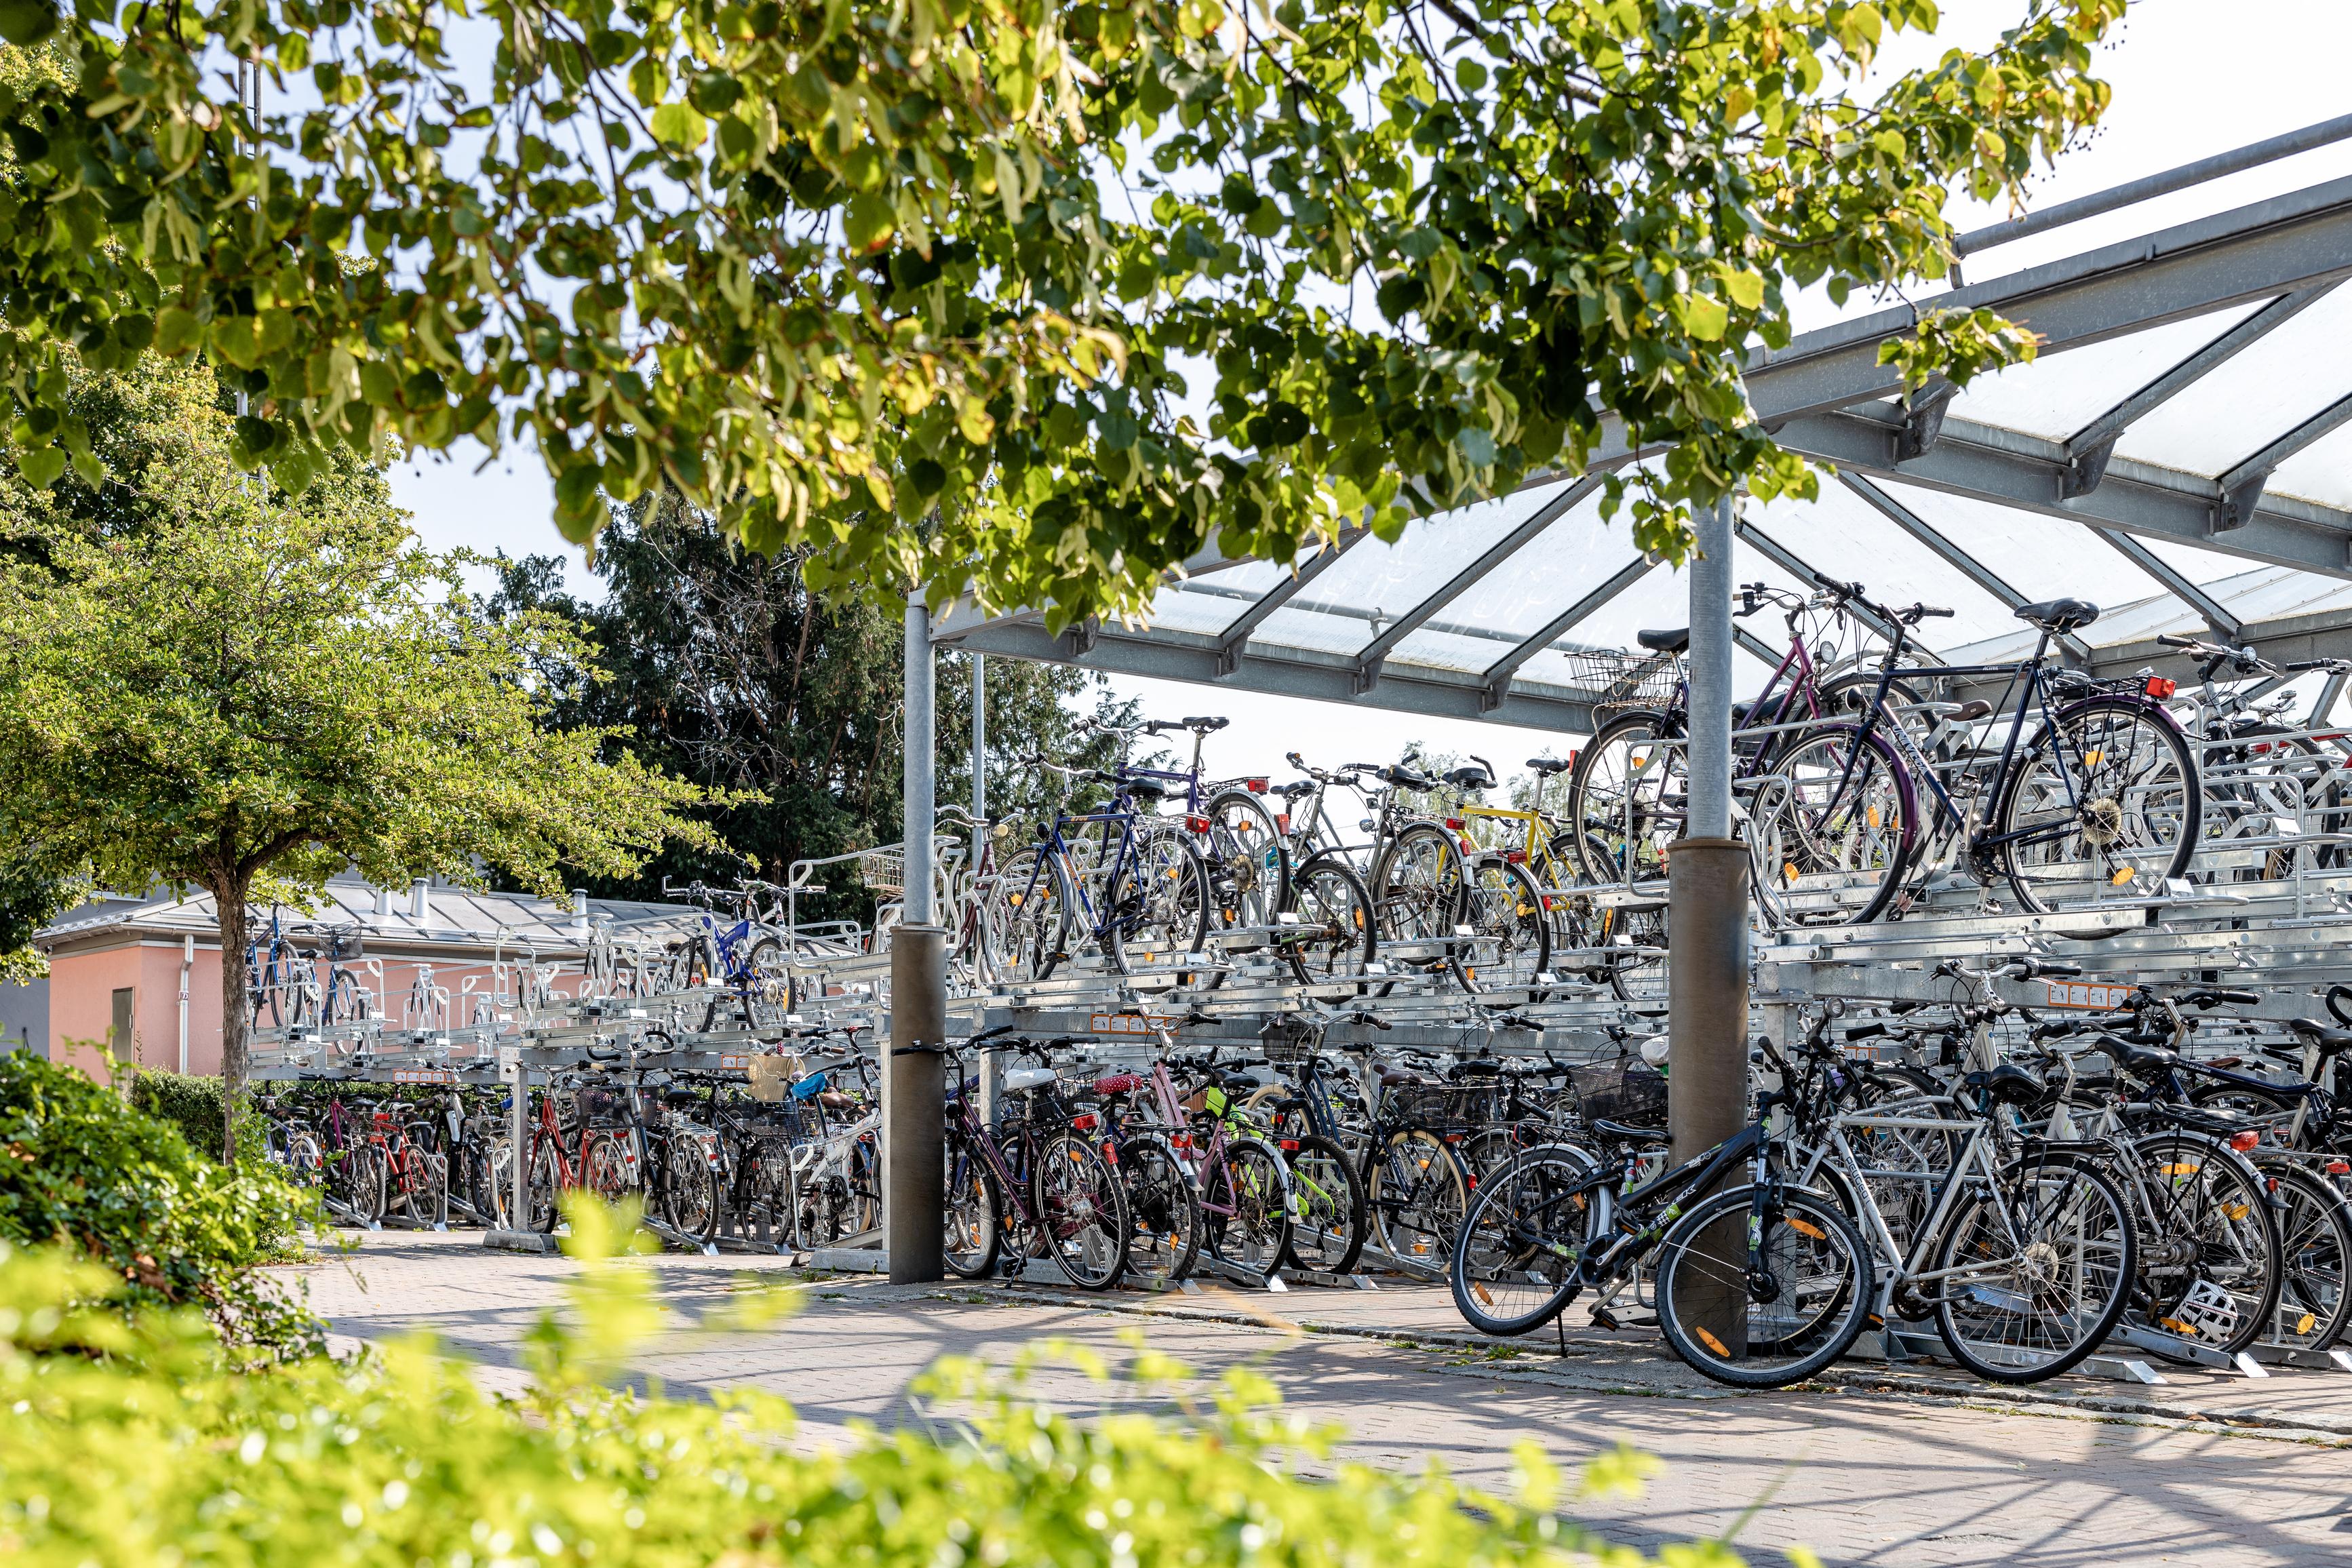 A parking facility for 800 bicycles at Freising.